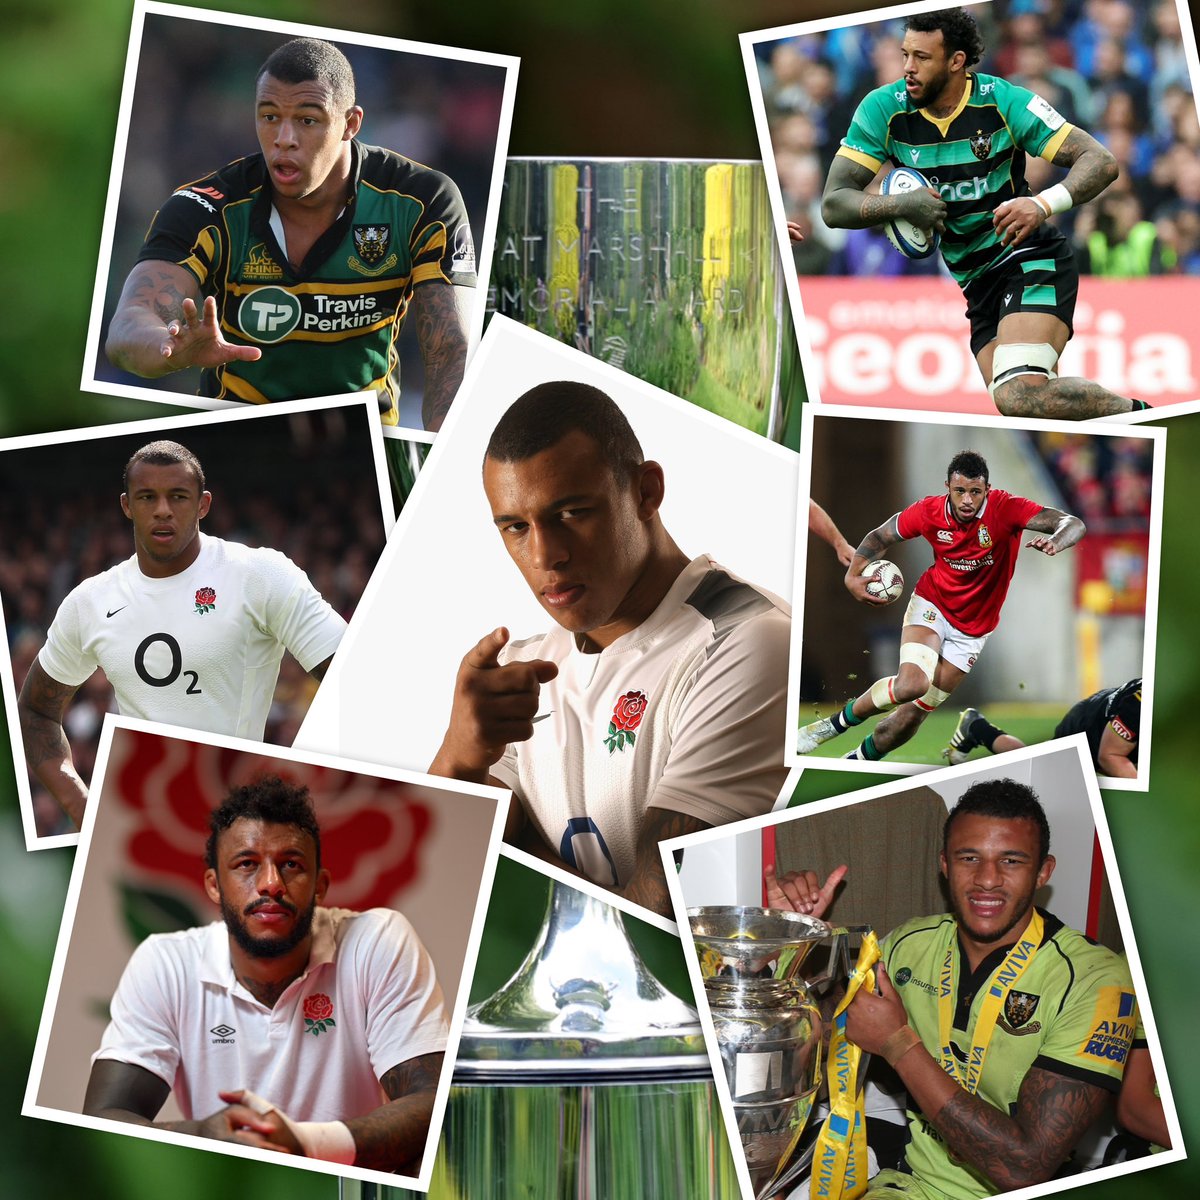 🏆🏴󠁧󠁢󠁥󠁮󠁧󠁿😇 

Ladies & gents; your Pat Marshall Memorial Award winner for 2023-24. 

The sensational Courtney Lawes!

An icon of @SaintsRugby @EnglandRugby & @lionsofficial, he joins the pantheon of greats as our personality of the year. 

Congrats @Courtney_Lawes!
#Pat2024 #RUWC2024